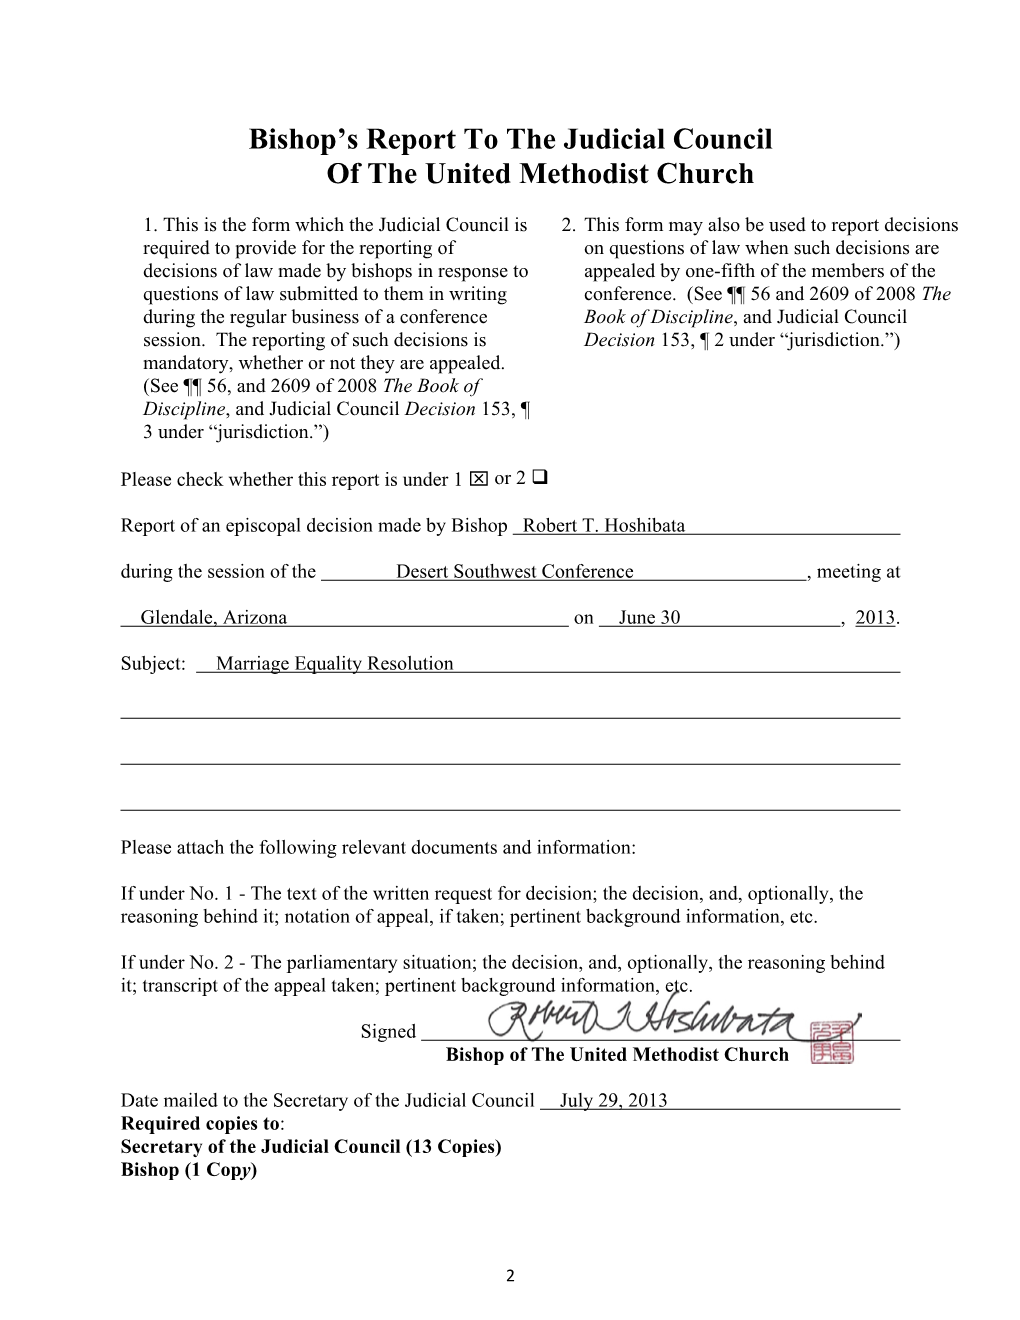 Bishop's Report to the Judicial Council of the United Methodist